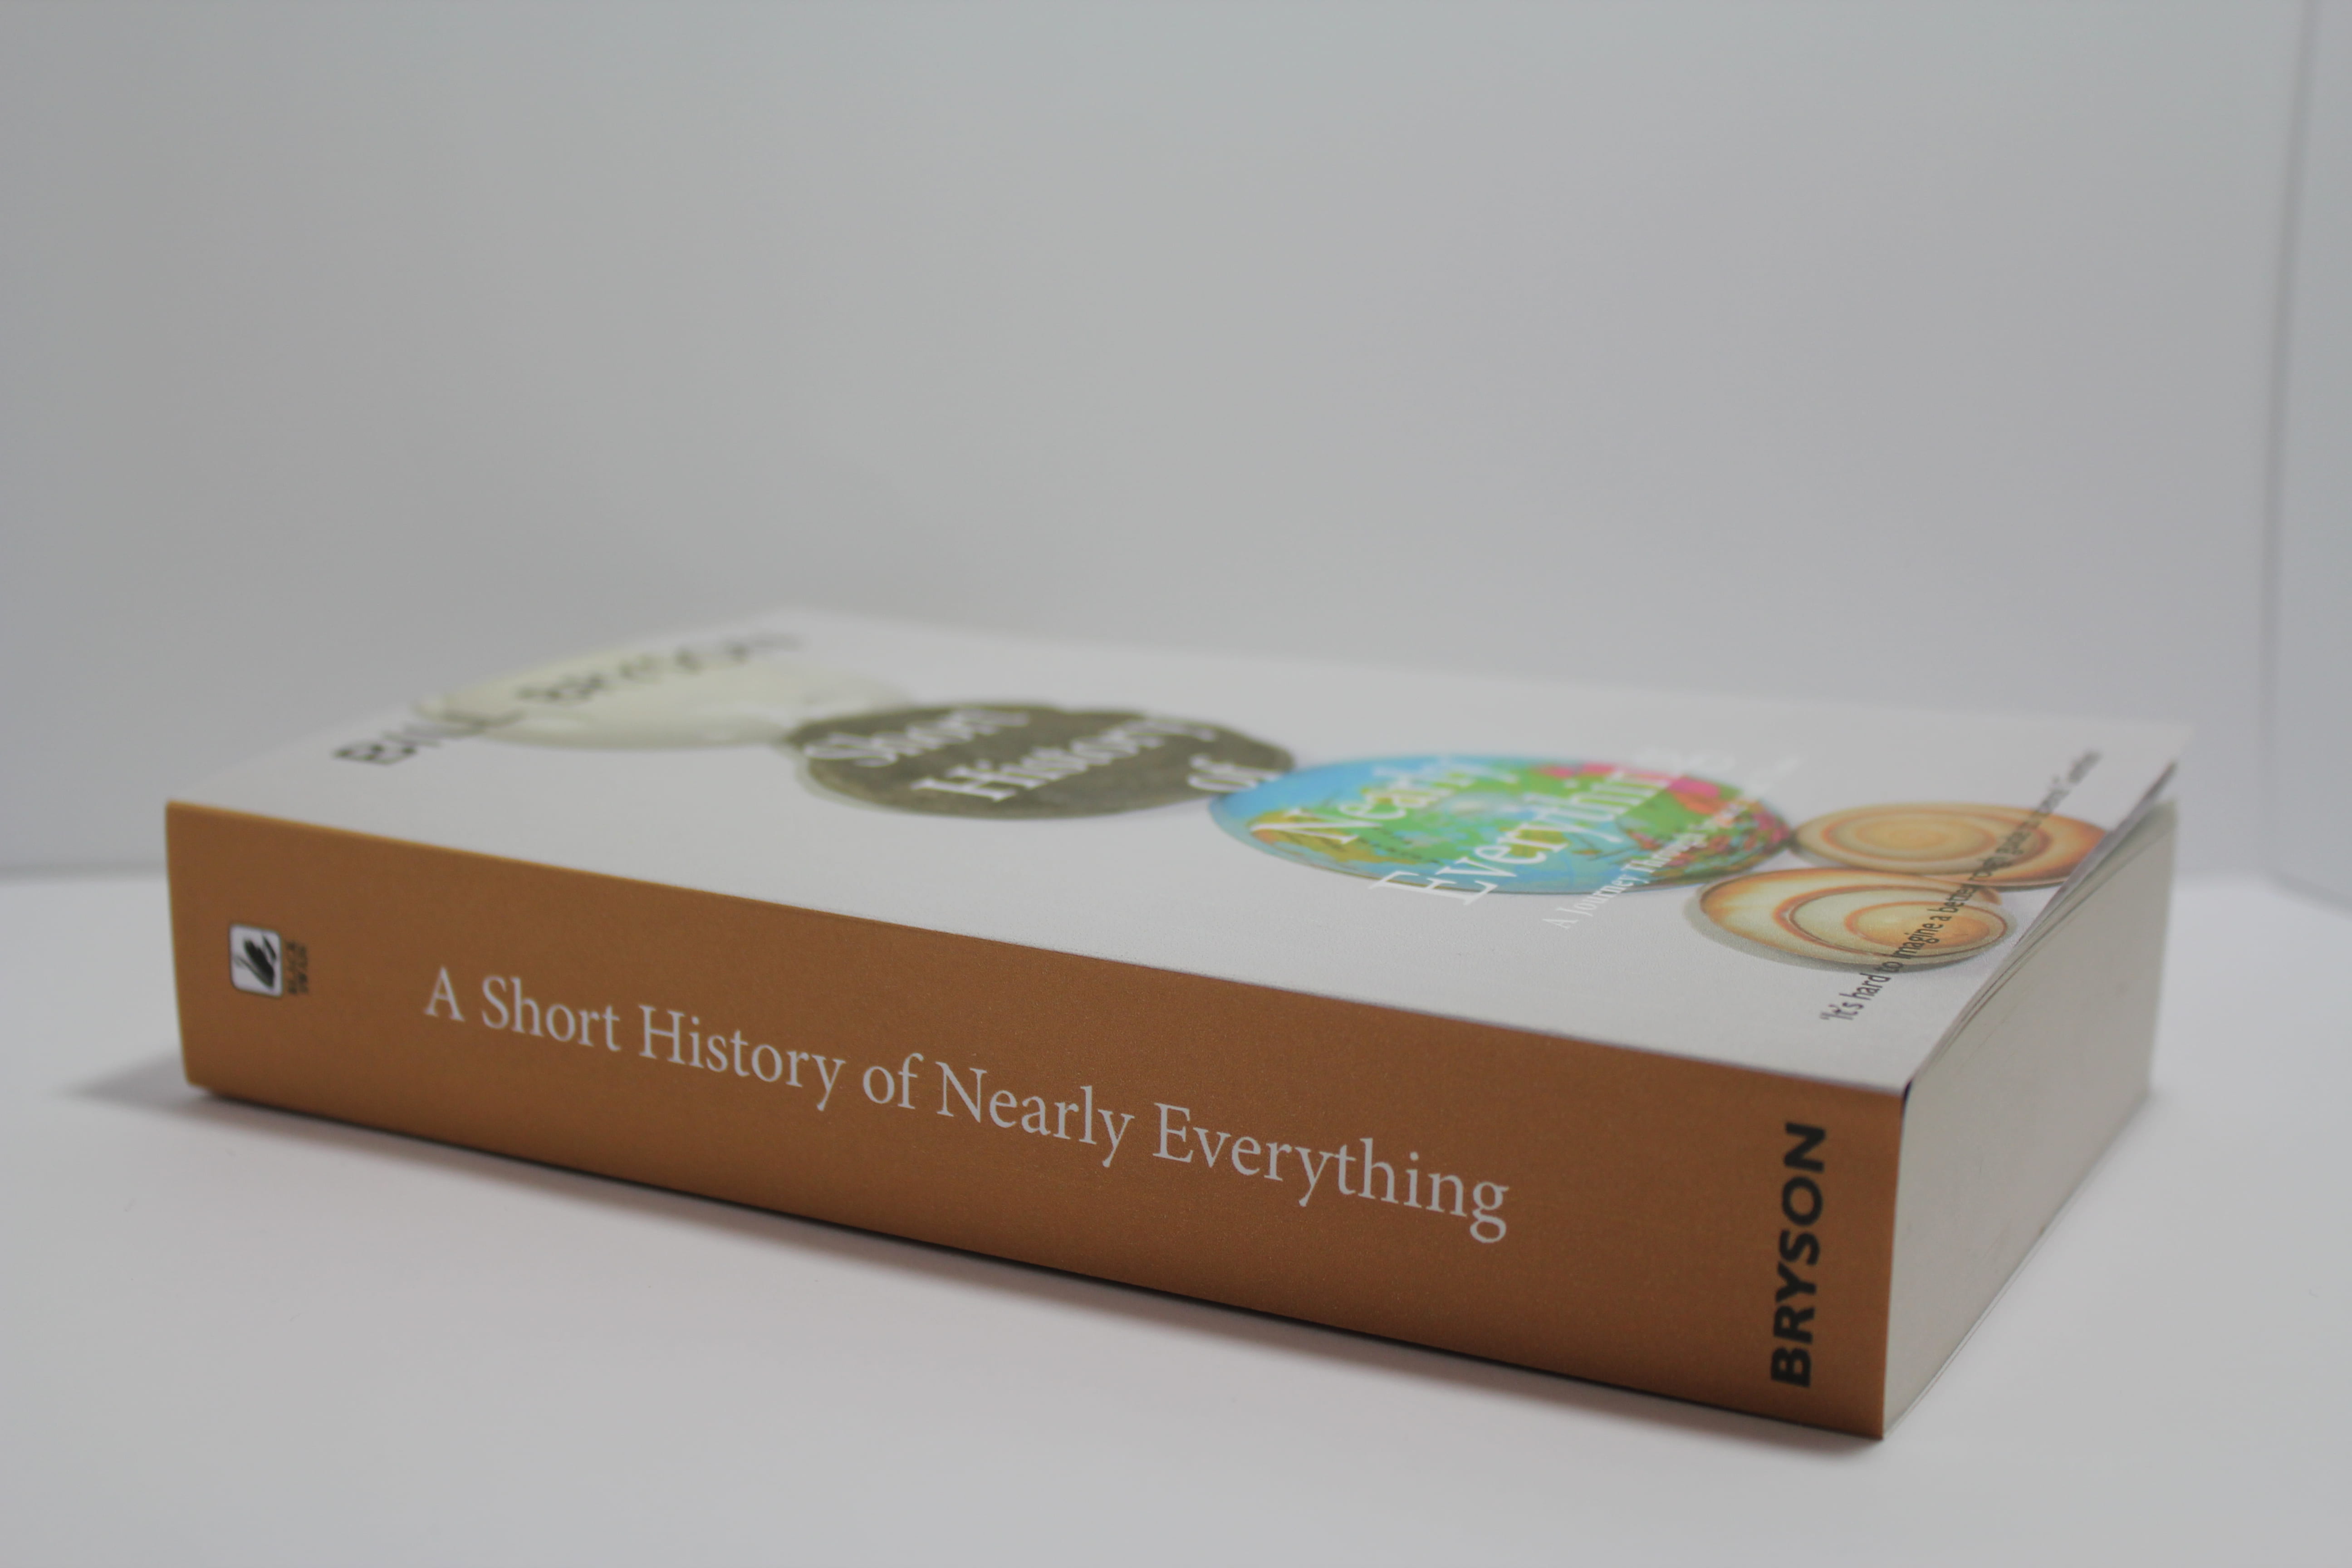 Photographic cover with stacked shells on a globe on Bill Bryson's 'A short history of nearly everything'.